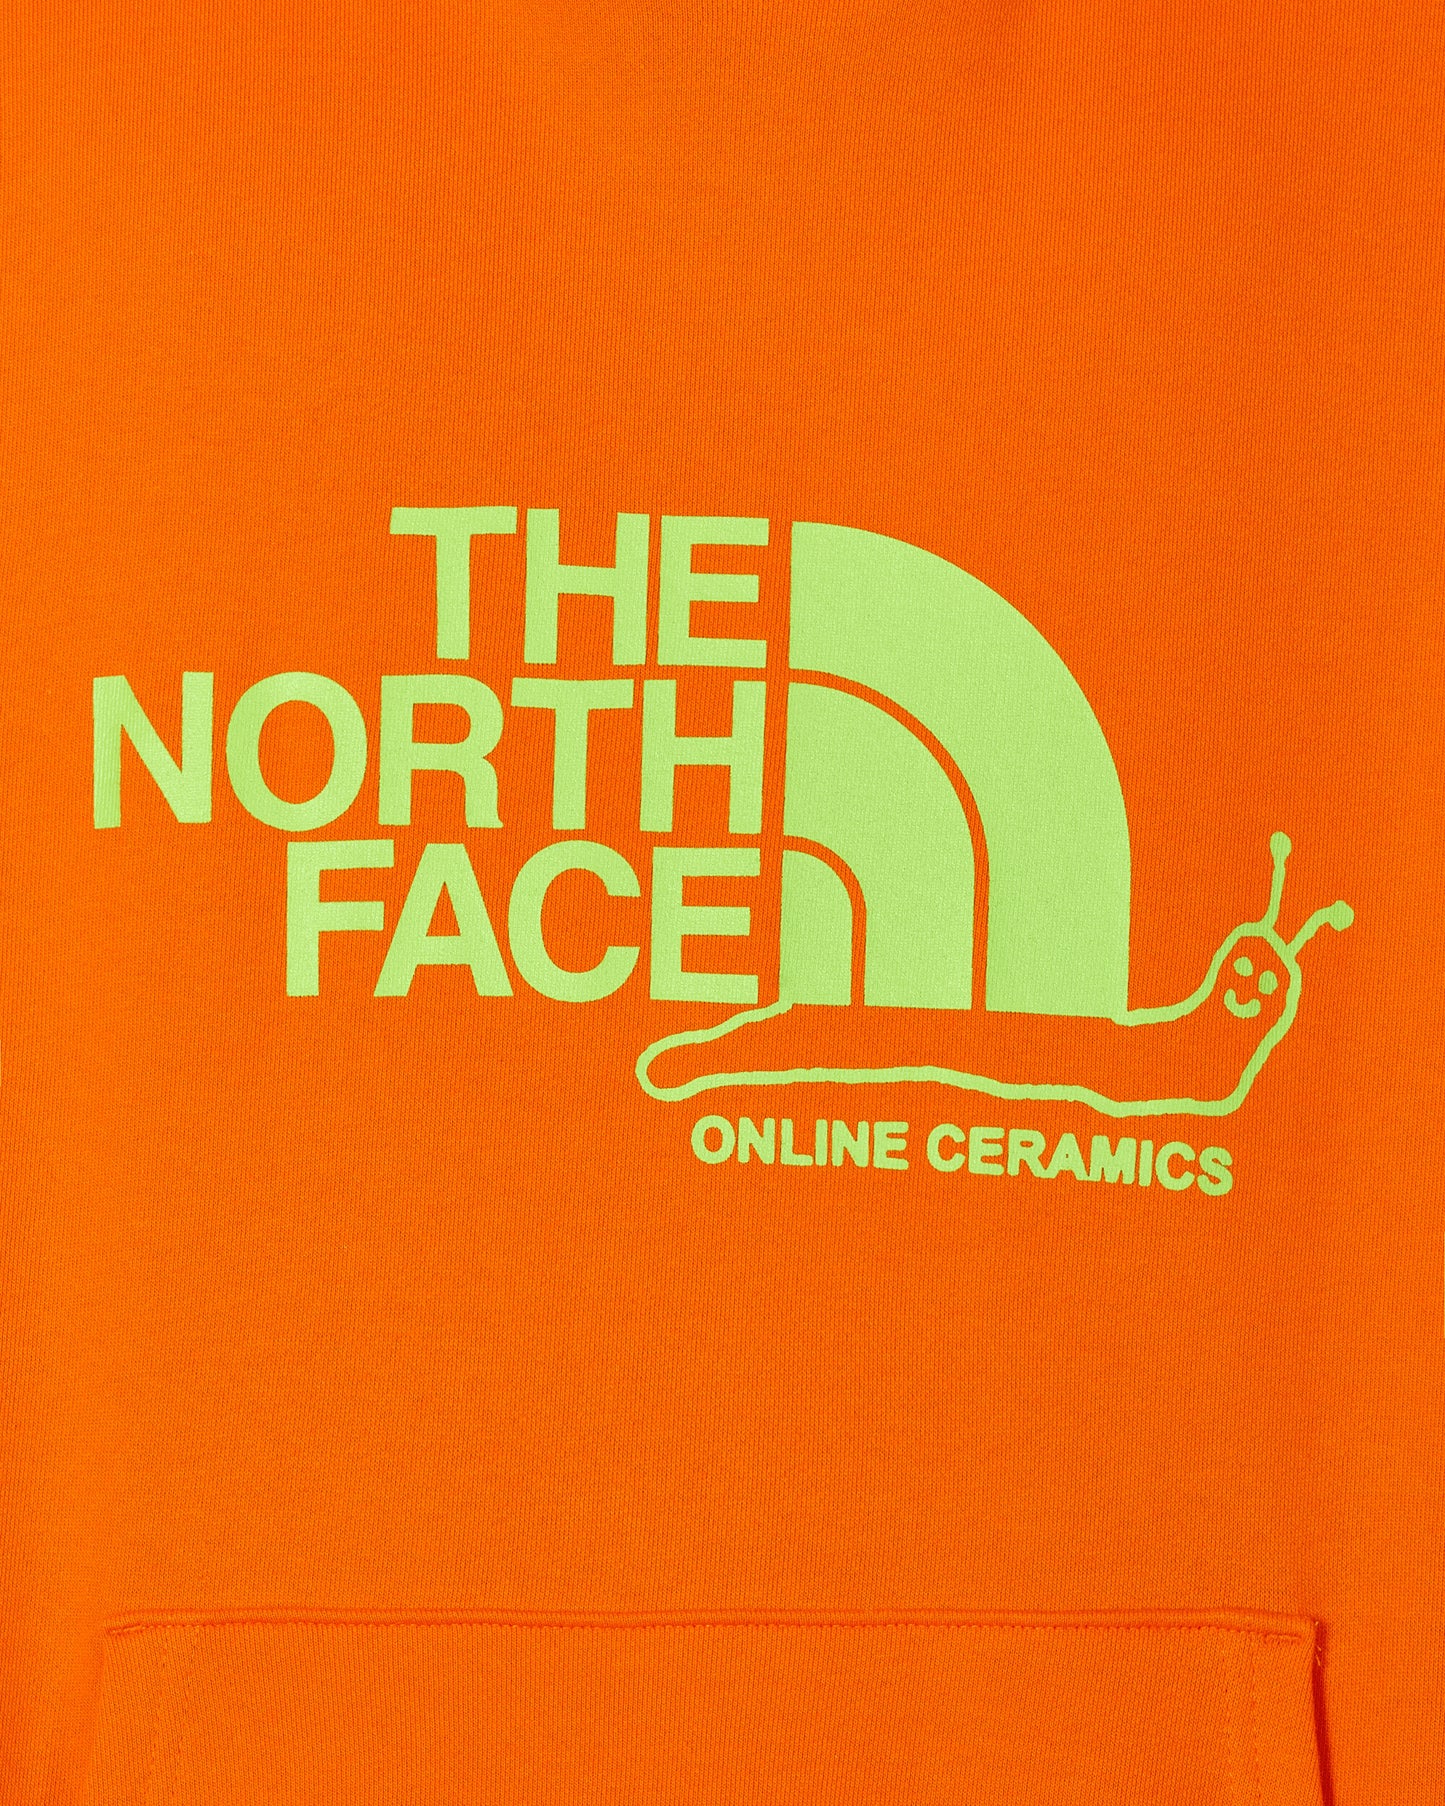 The North Face Project X Tnf X Oc Hoodie Red Orange Sweatshirts Hoodies NF0A84RV A6M1